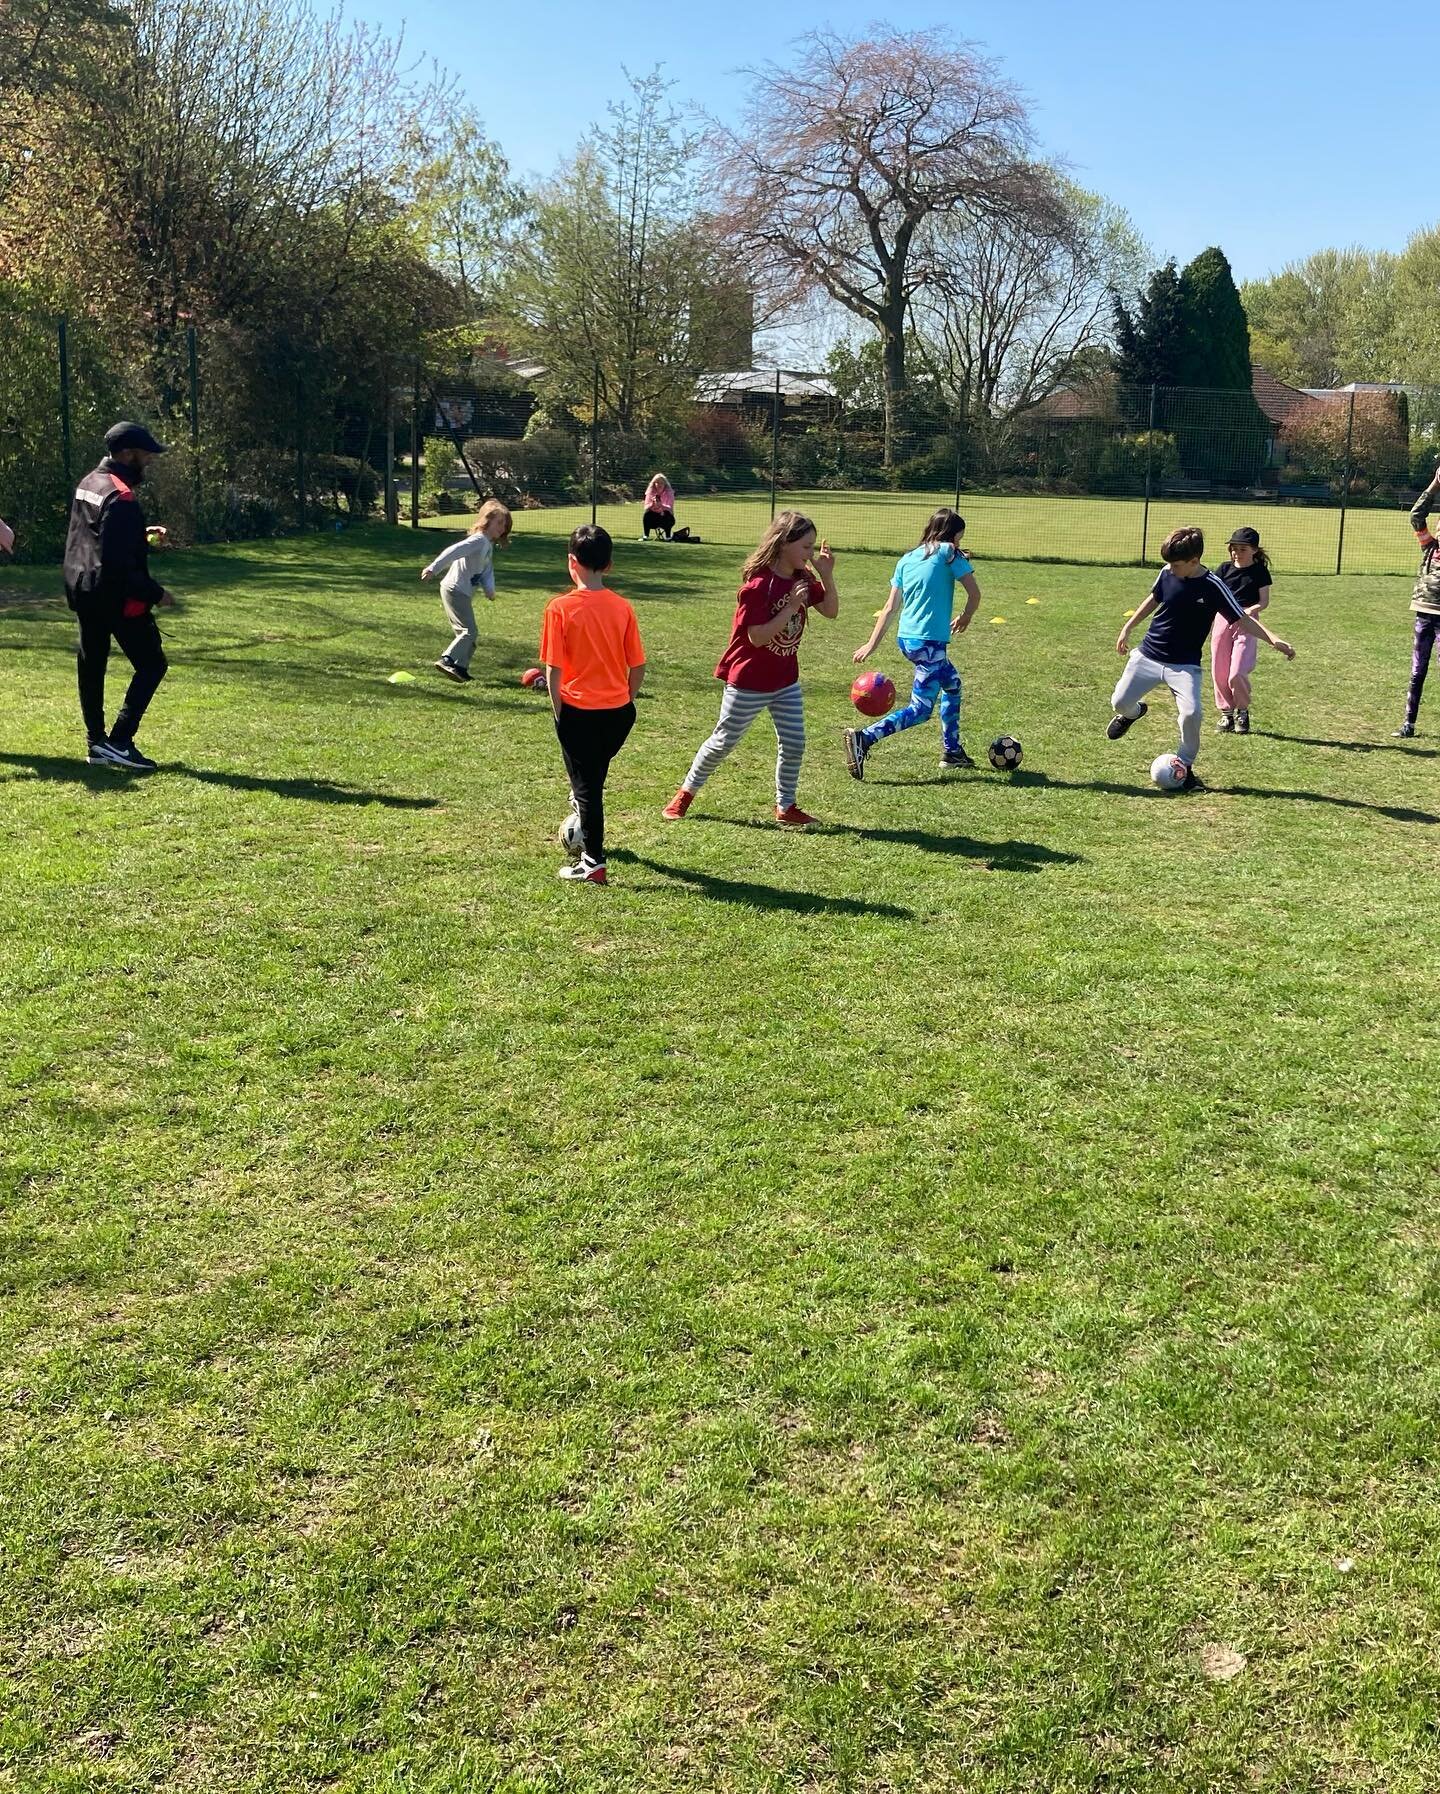 Summer days are coming!

What&rsquo;s better than playing football? Playing football in the sun!

We are excited that summer is fast approaching😁
Keep your eyes open for more pics of our amazing outdoor sessions every weekday &amp; weekend!

www.foo